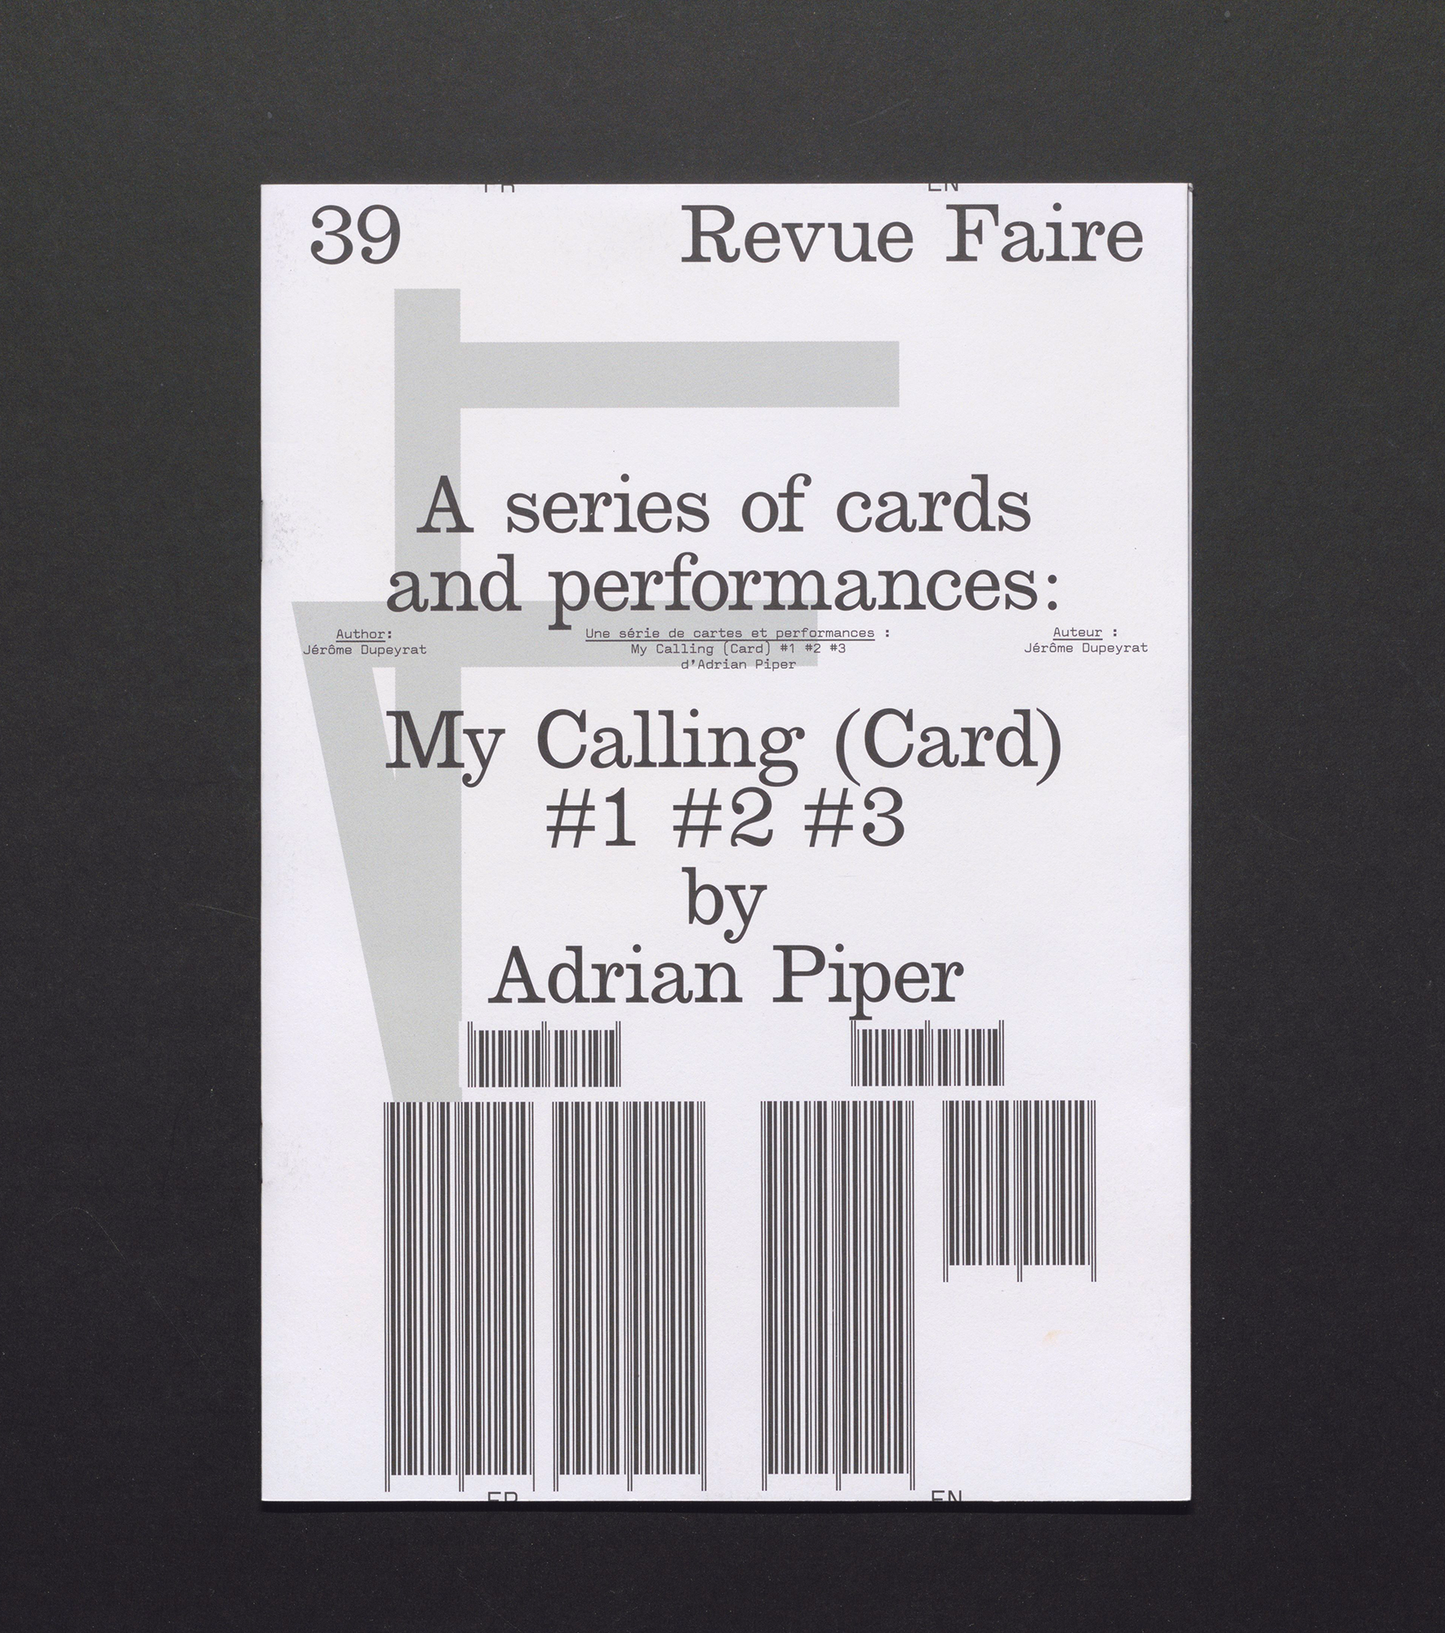 Revue Faire No. 39 - A series of cards and performances: My Calling (Card) #1 #2 #3 by Adrian Piper